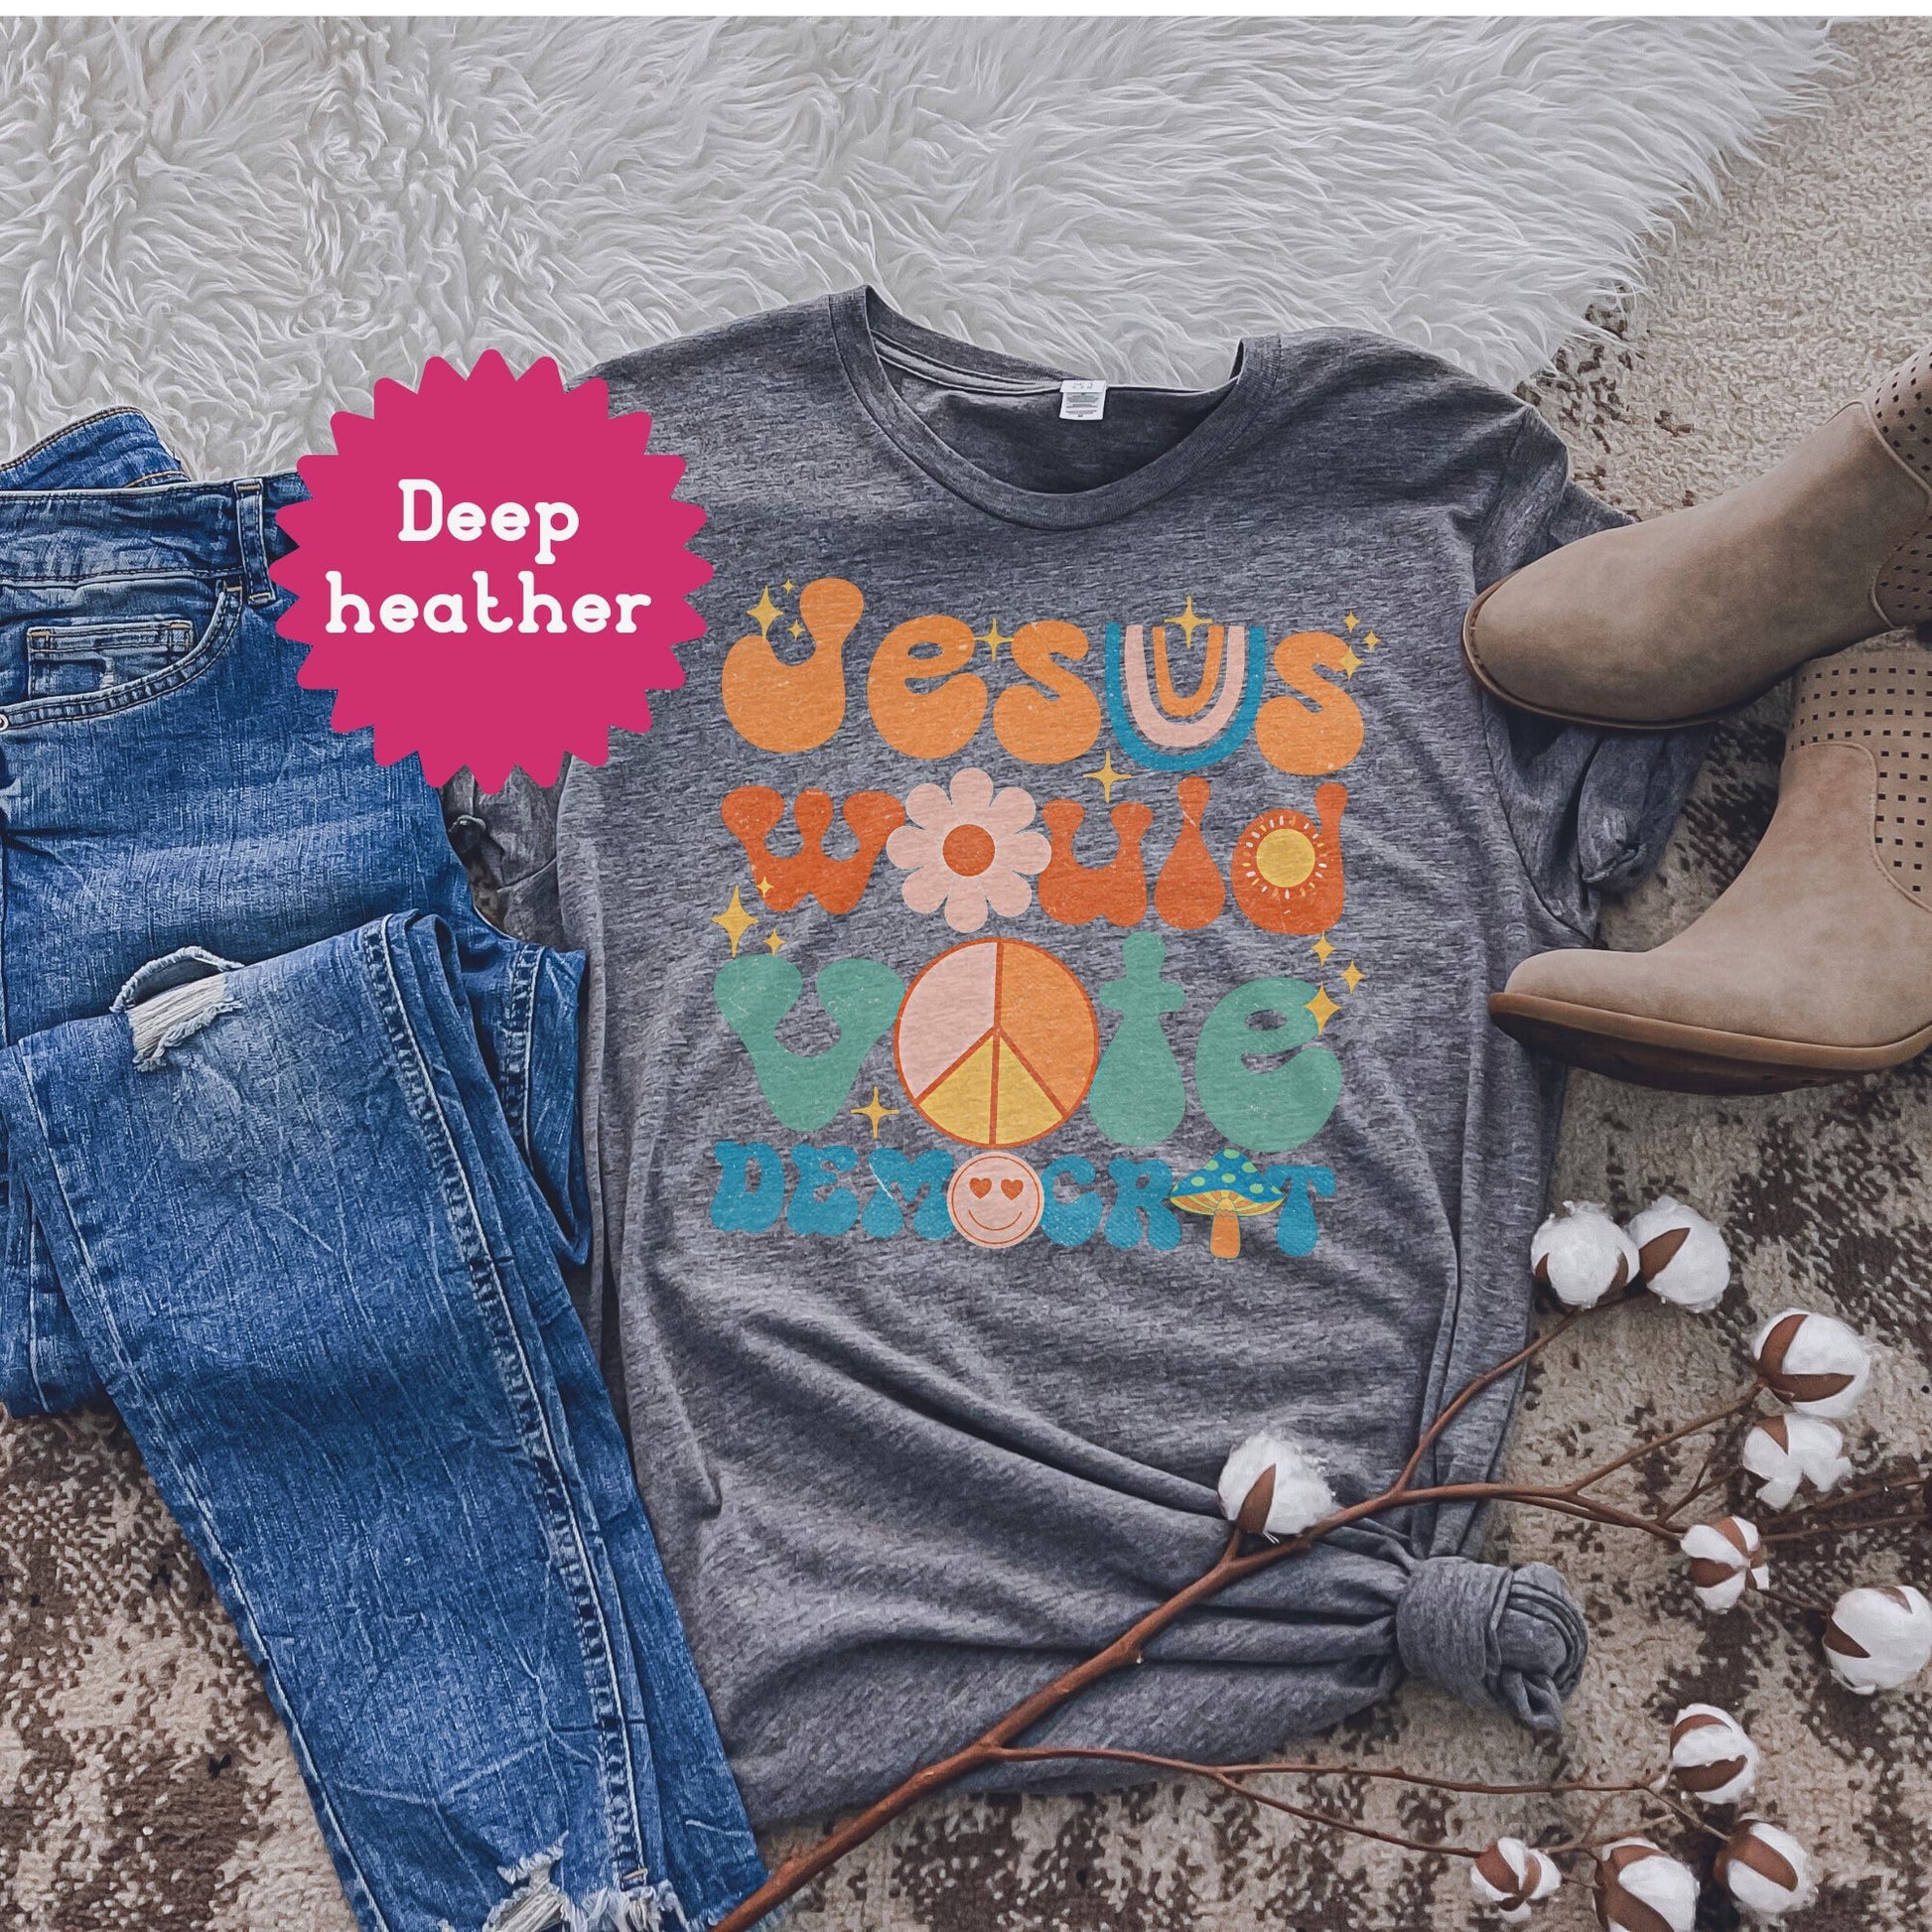 Jesus Would Vote Democrat Tshirt, Political Humor Tee, Liberal Shirts For Elections, Trendy Hippie Retro Style Shirts, Peace Sign Mushroom